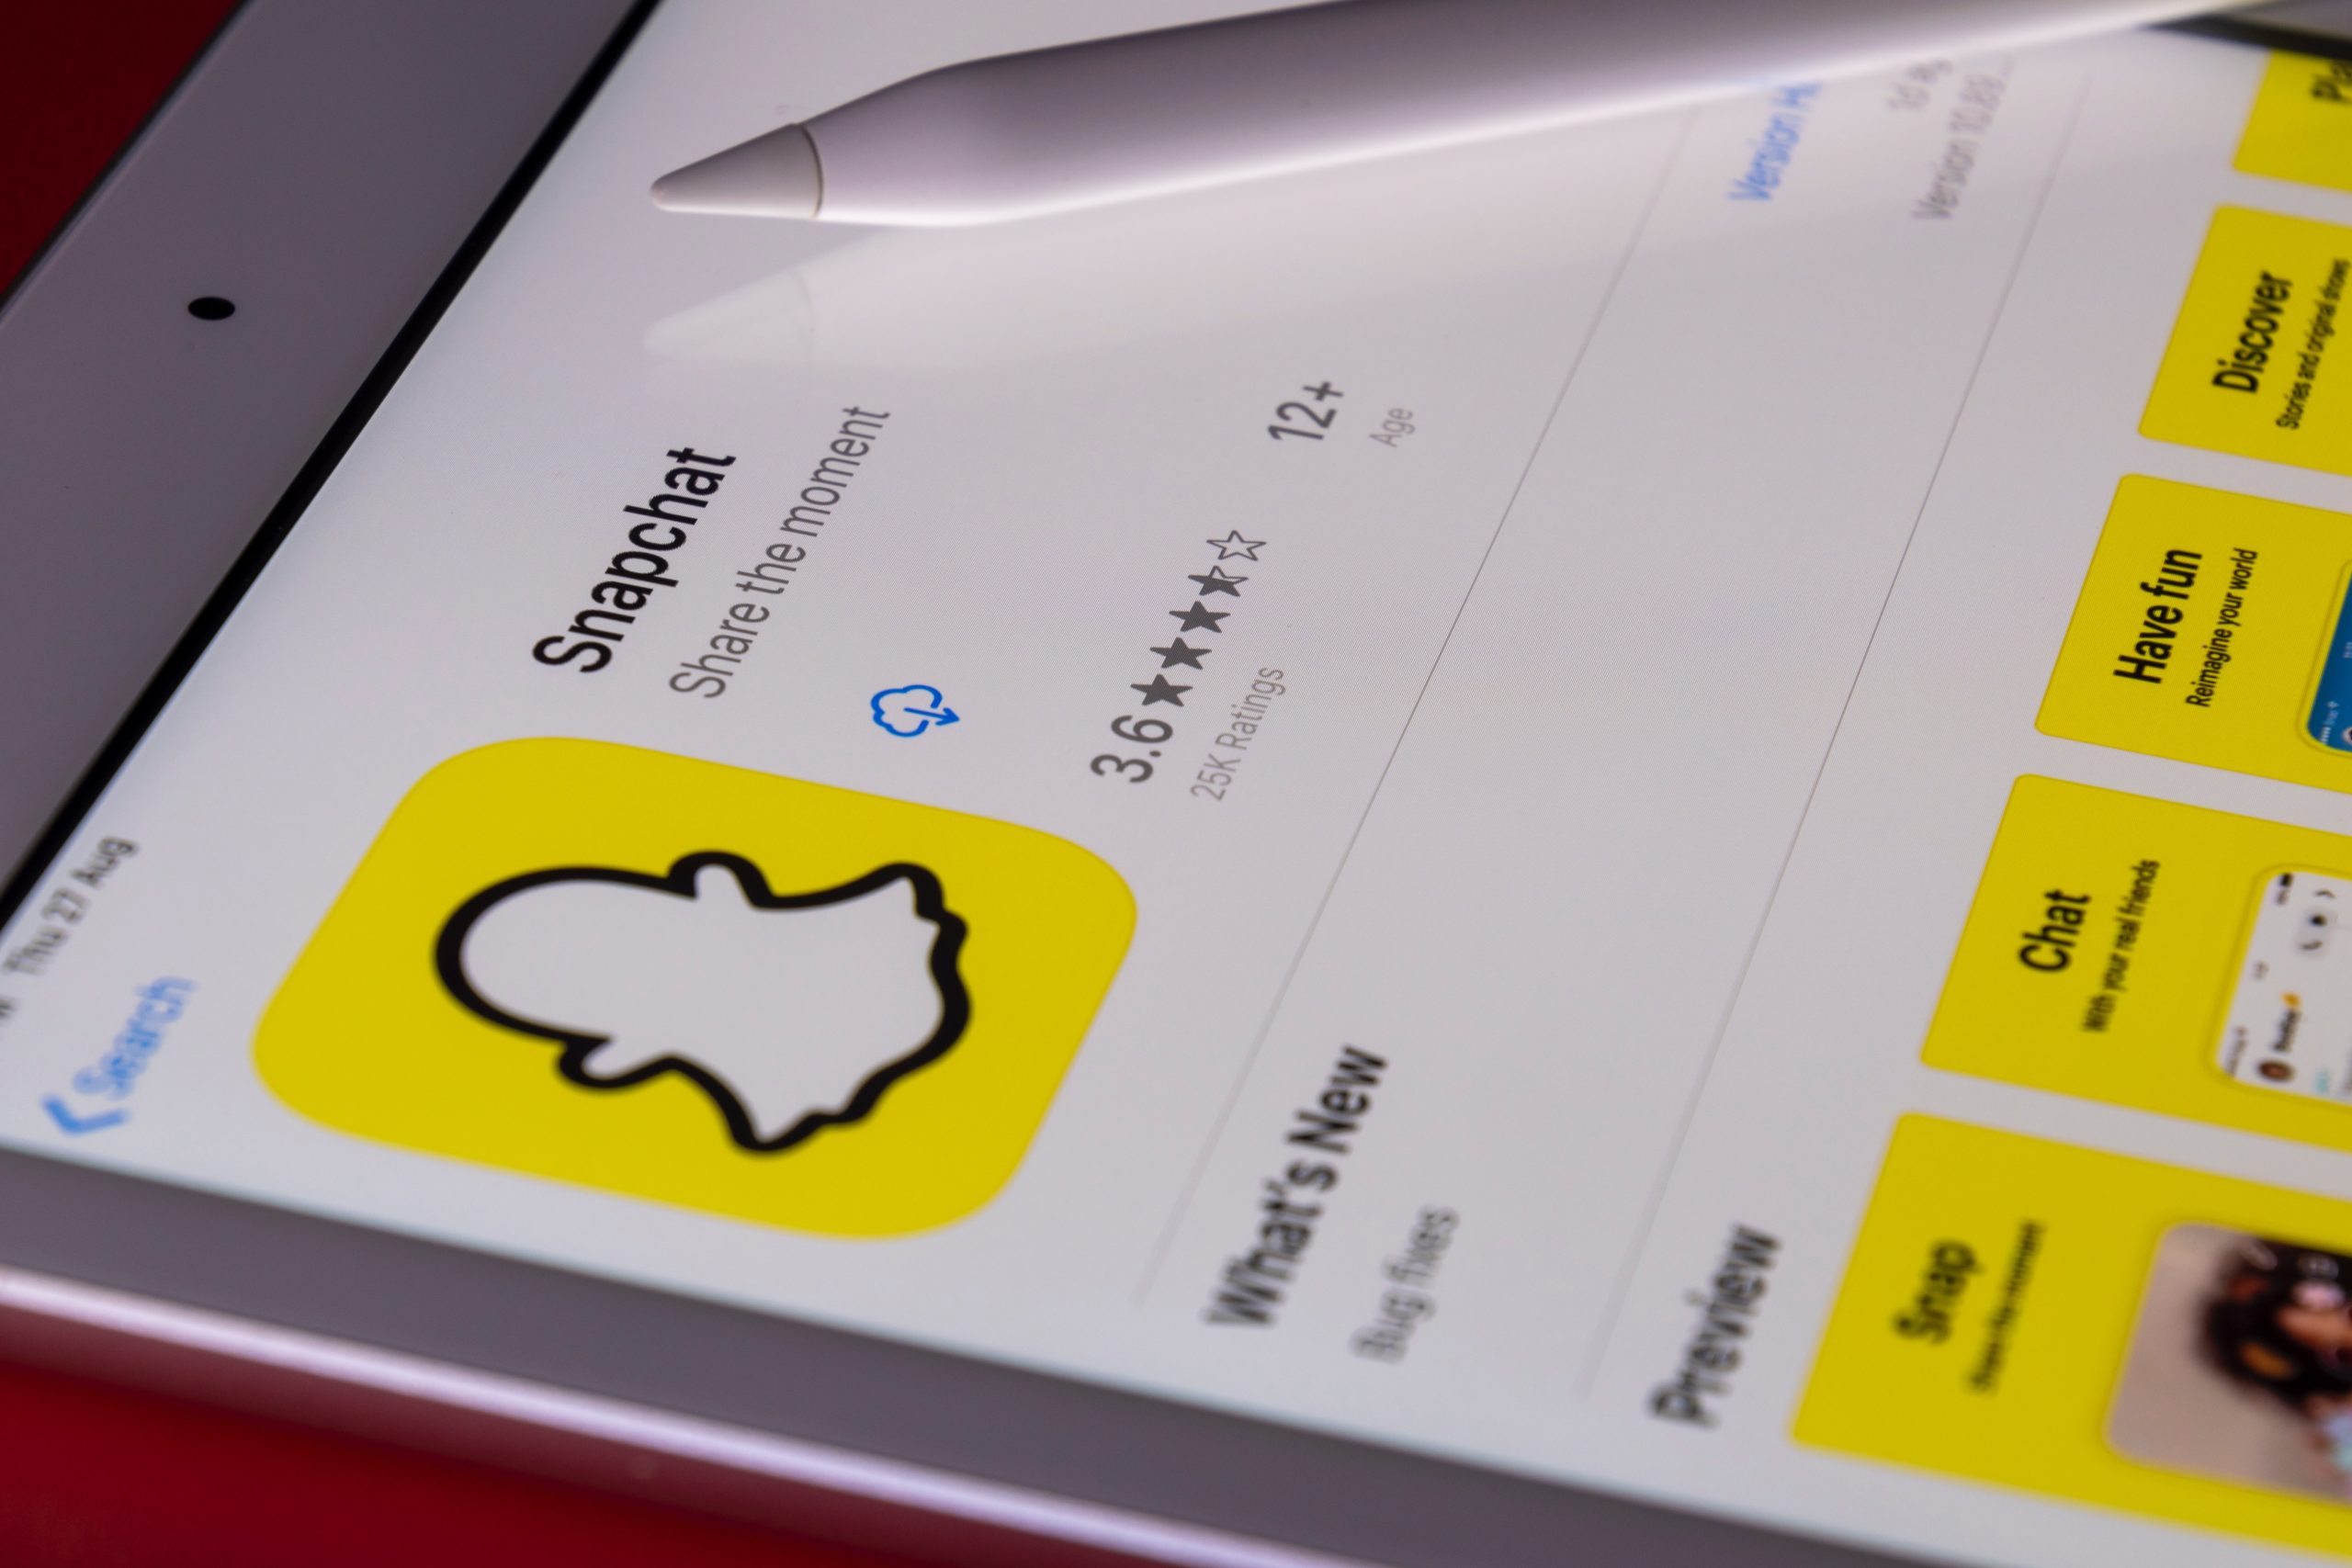 Many people around the world have downloaded Snapchat.